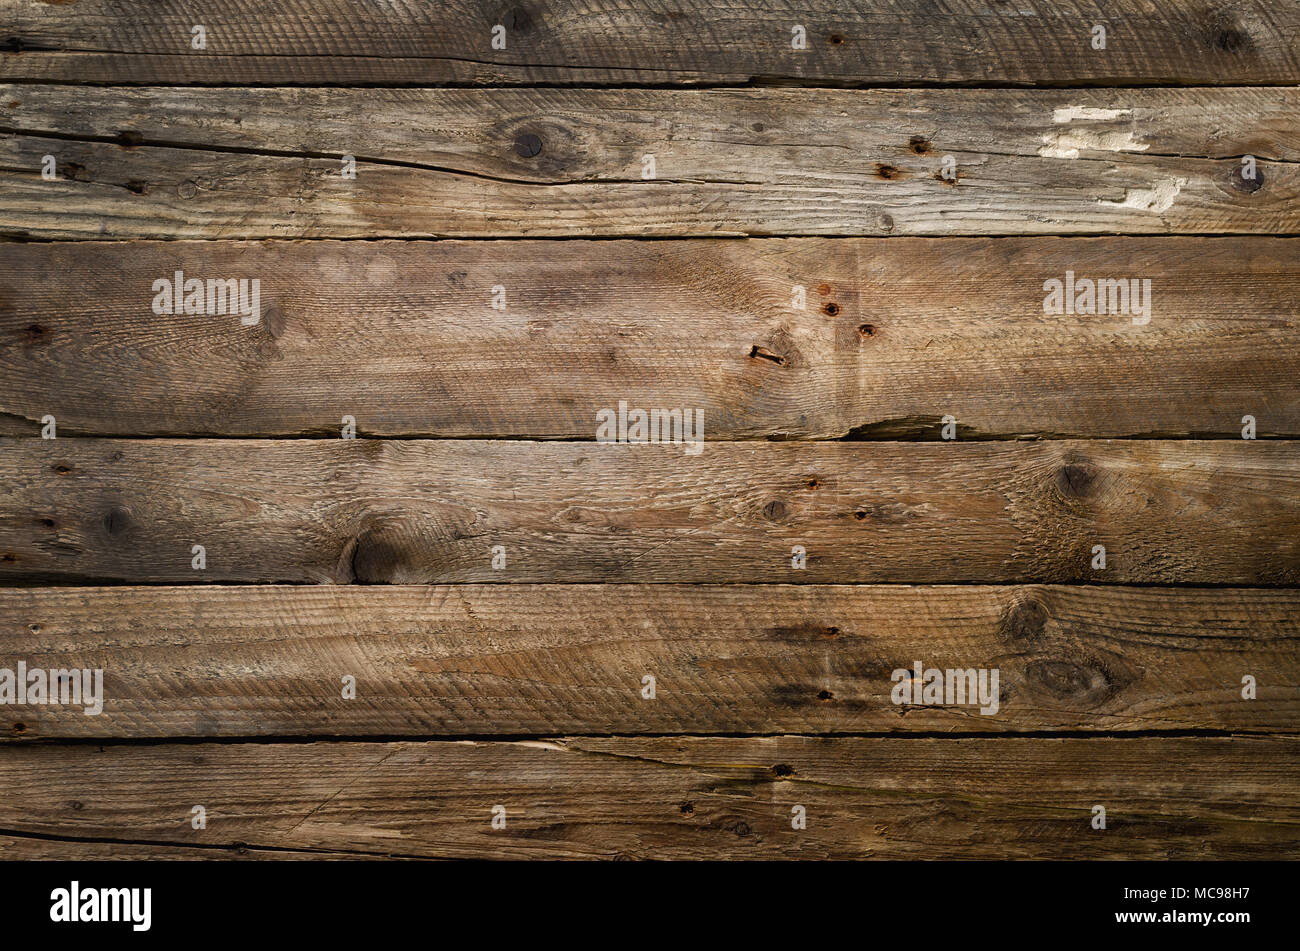 Natural wood texture for background. Copy space, banner Stock Photo